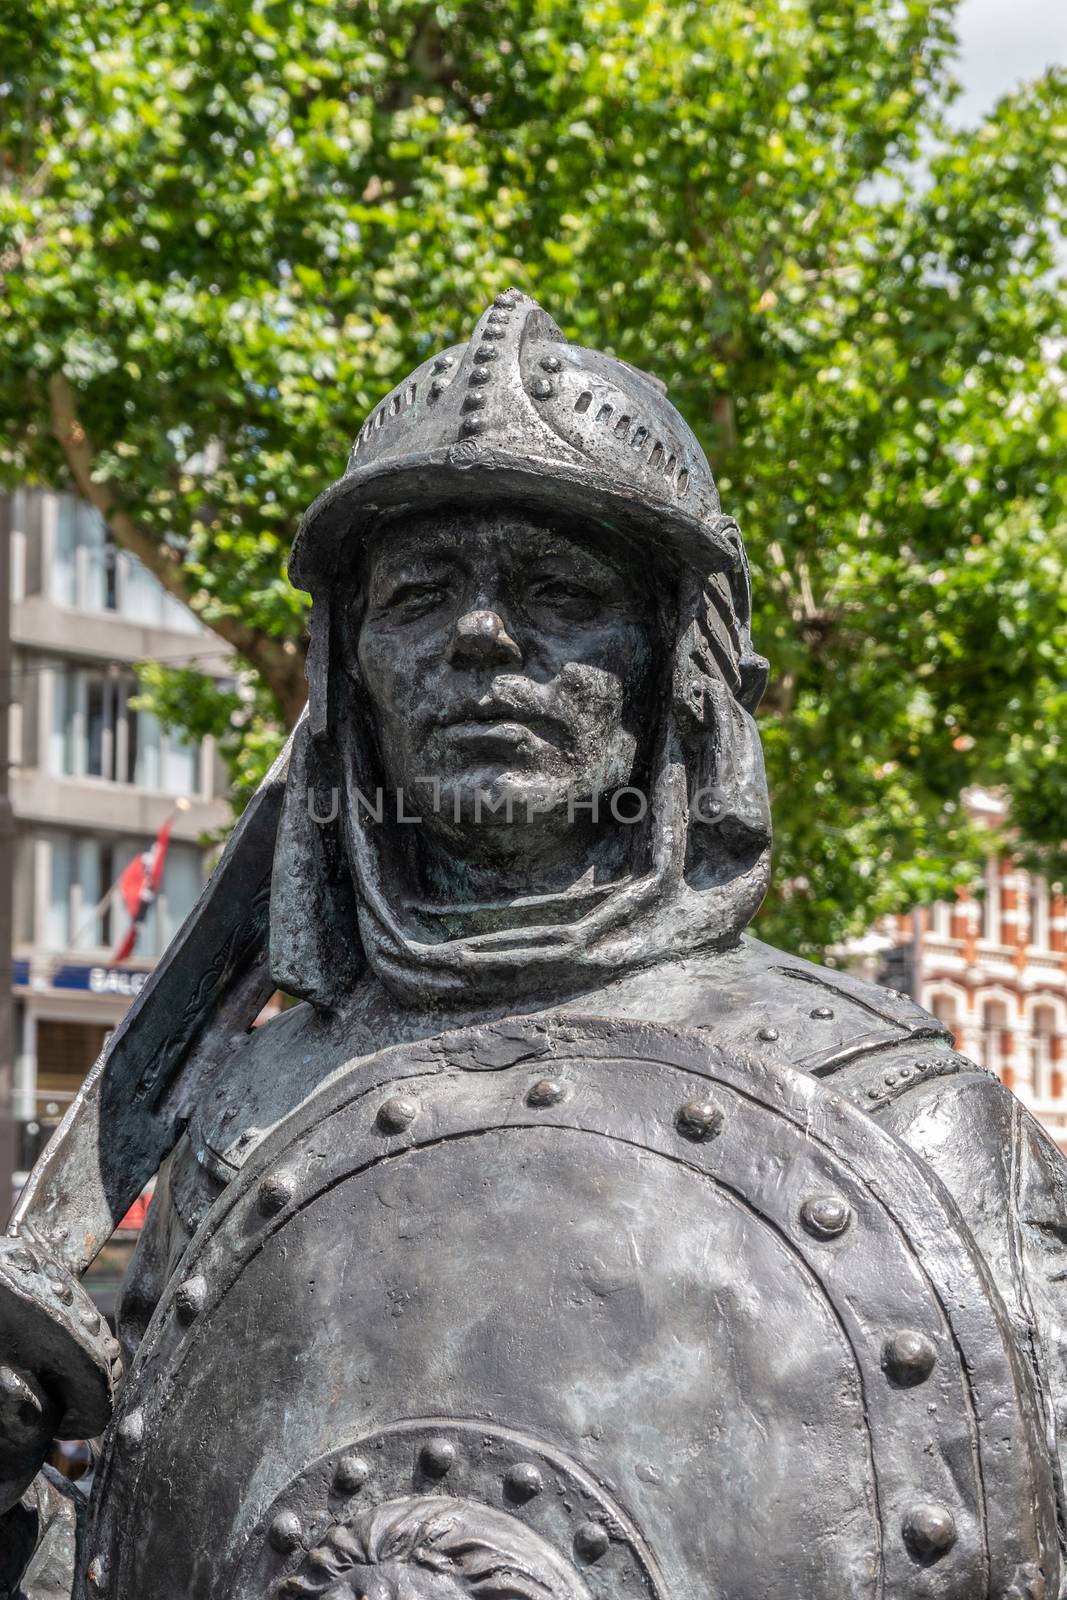 Amsterdam, the Netherlands - July 1, 2019: De Nachtwacht compostion of statues on Rembrandtplein. Closeup of bust of one of several shield and sword carrying figures against green foliage and buildings.